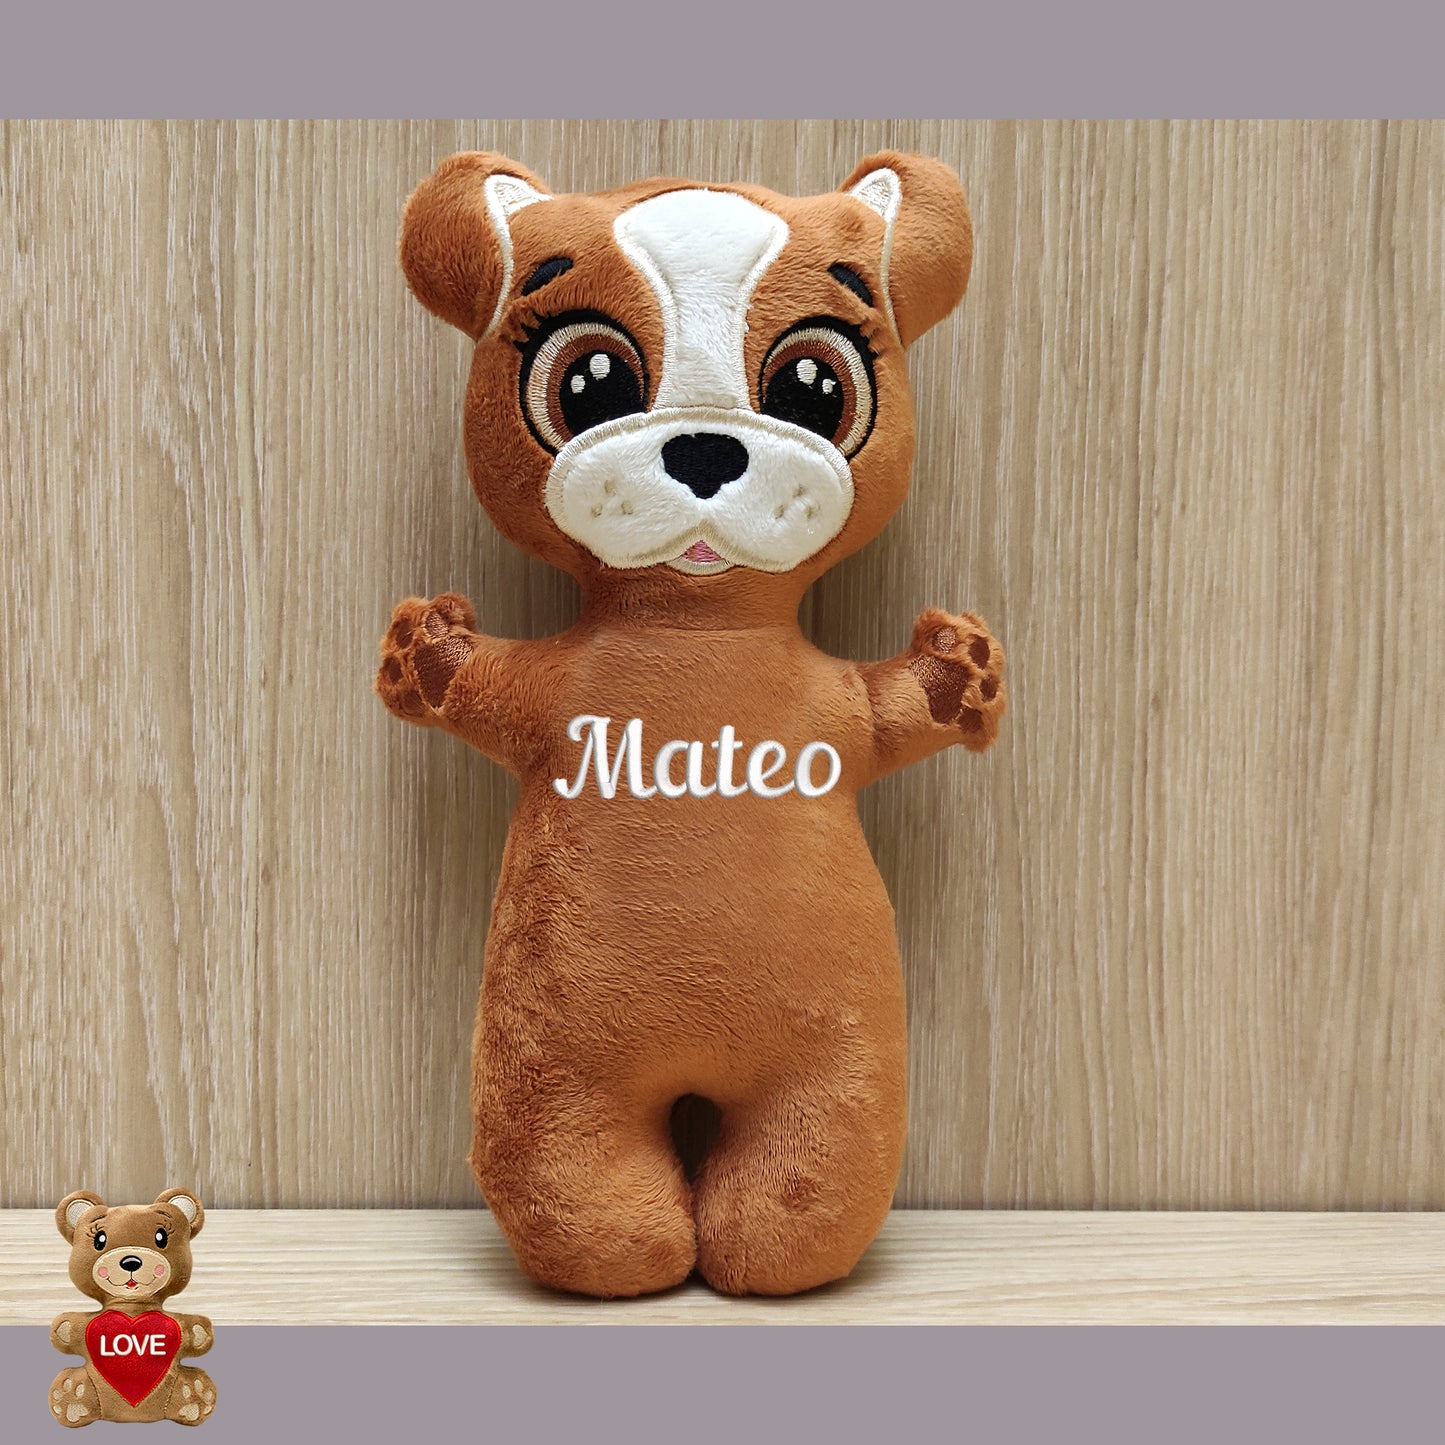 Personalised Cute Dog Stuffed toy ,Super cute personalised soft plush toy, Personalised Gift, Unique Personalized Birthday Gifts , Custom Gifts For Children